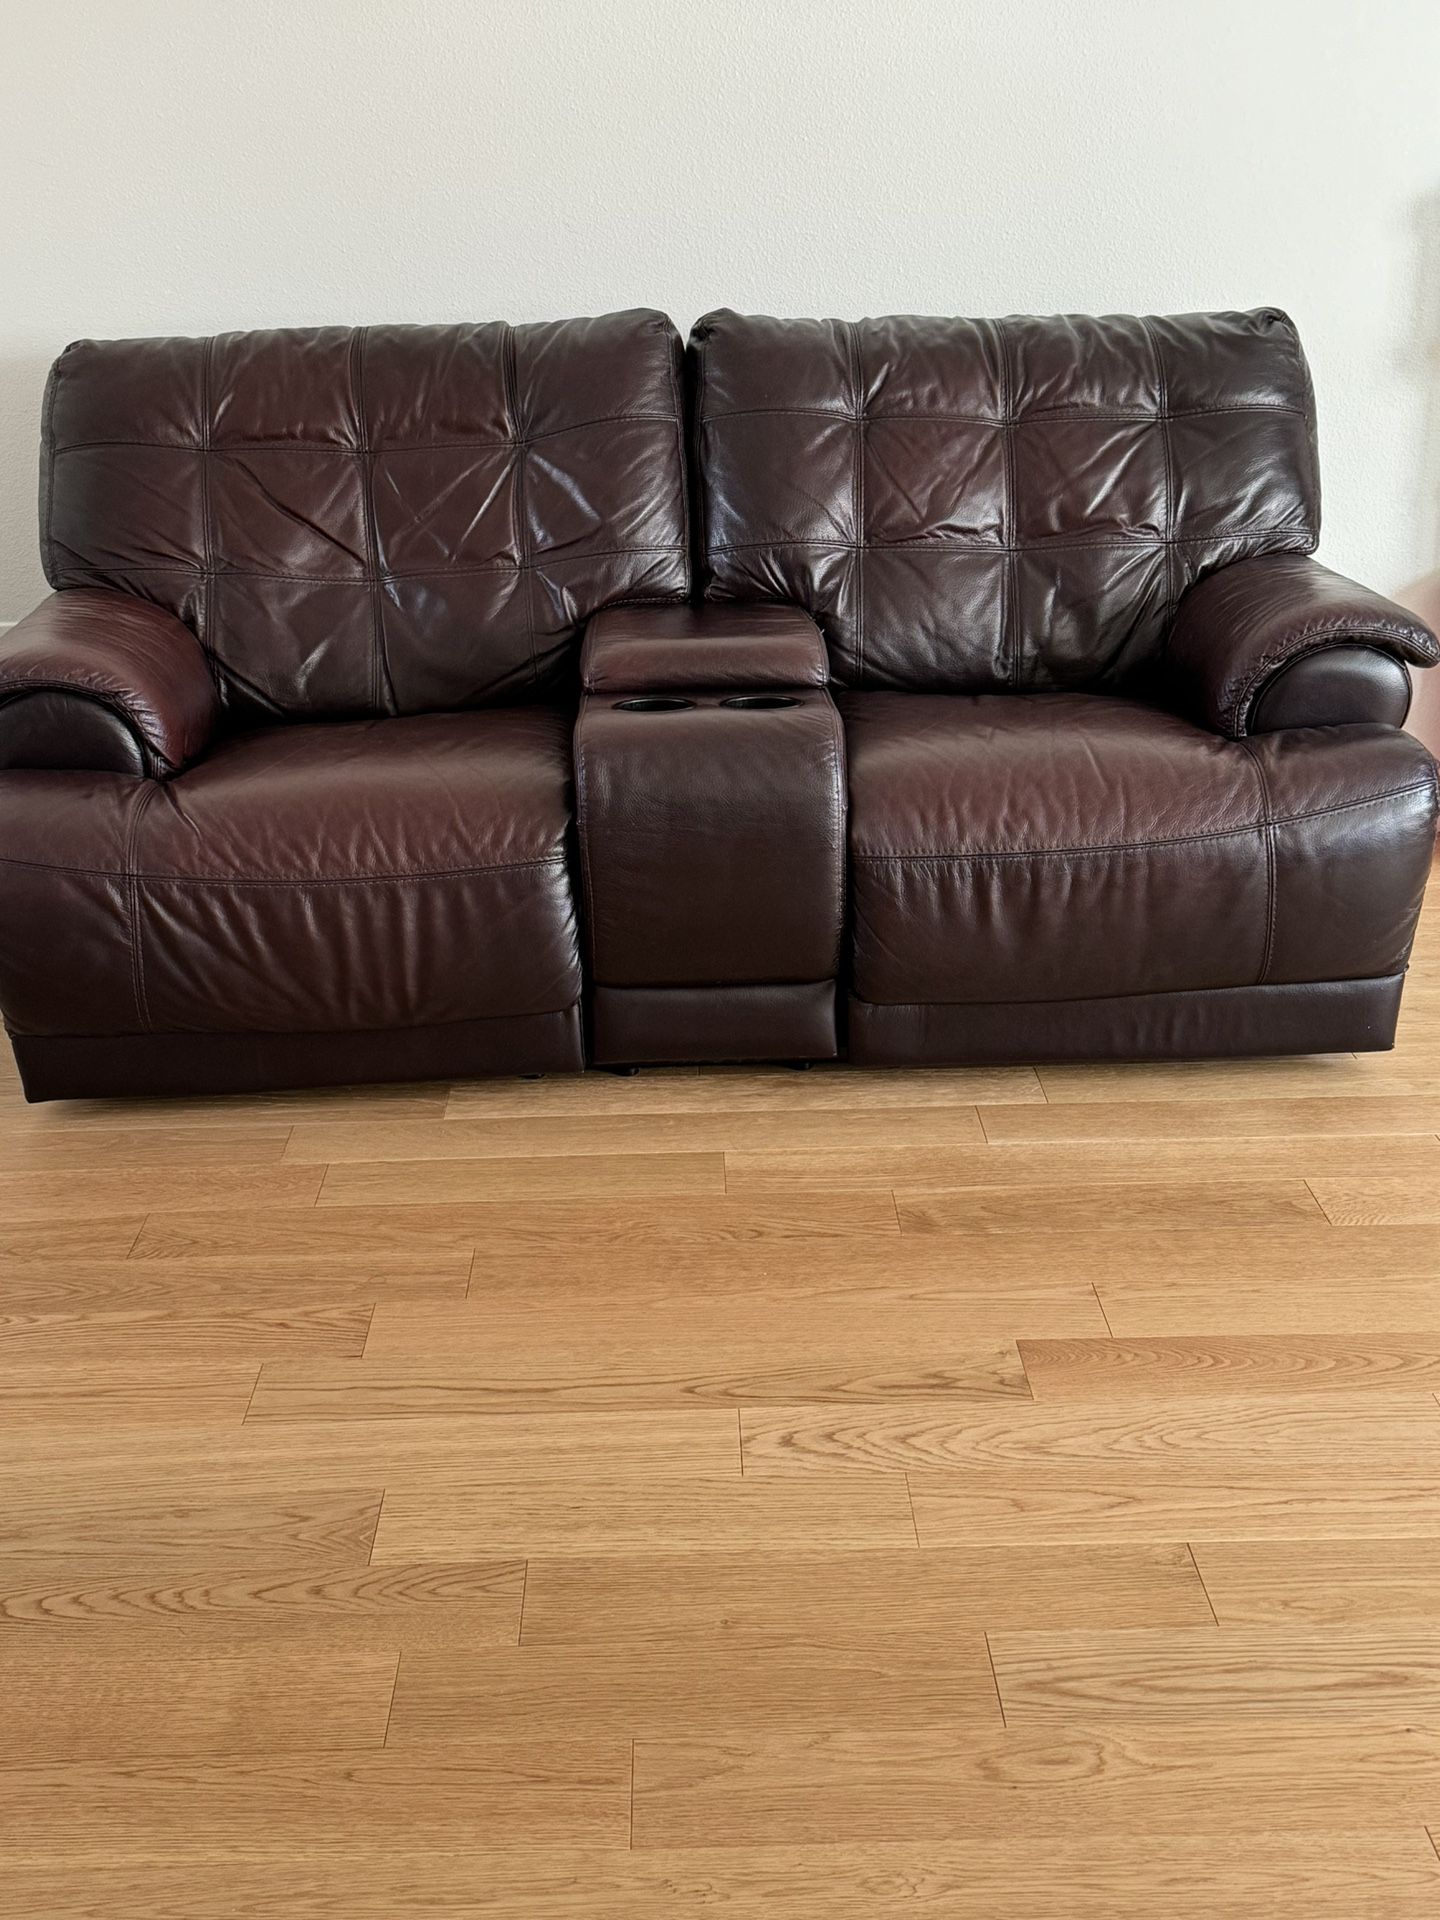 Reclining Loveseat/ Couch/ Sofa. Make An Offer